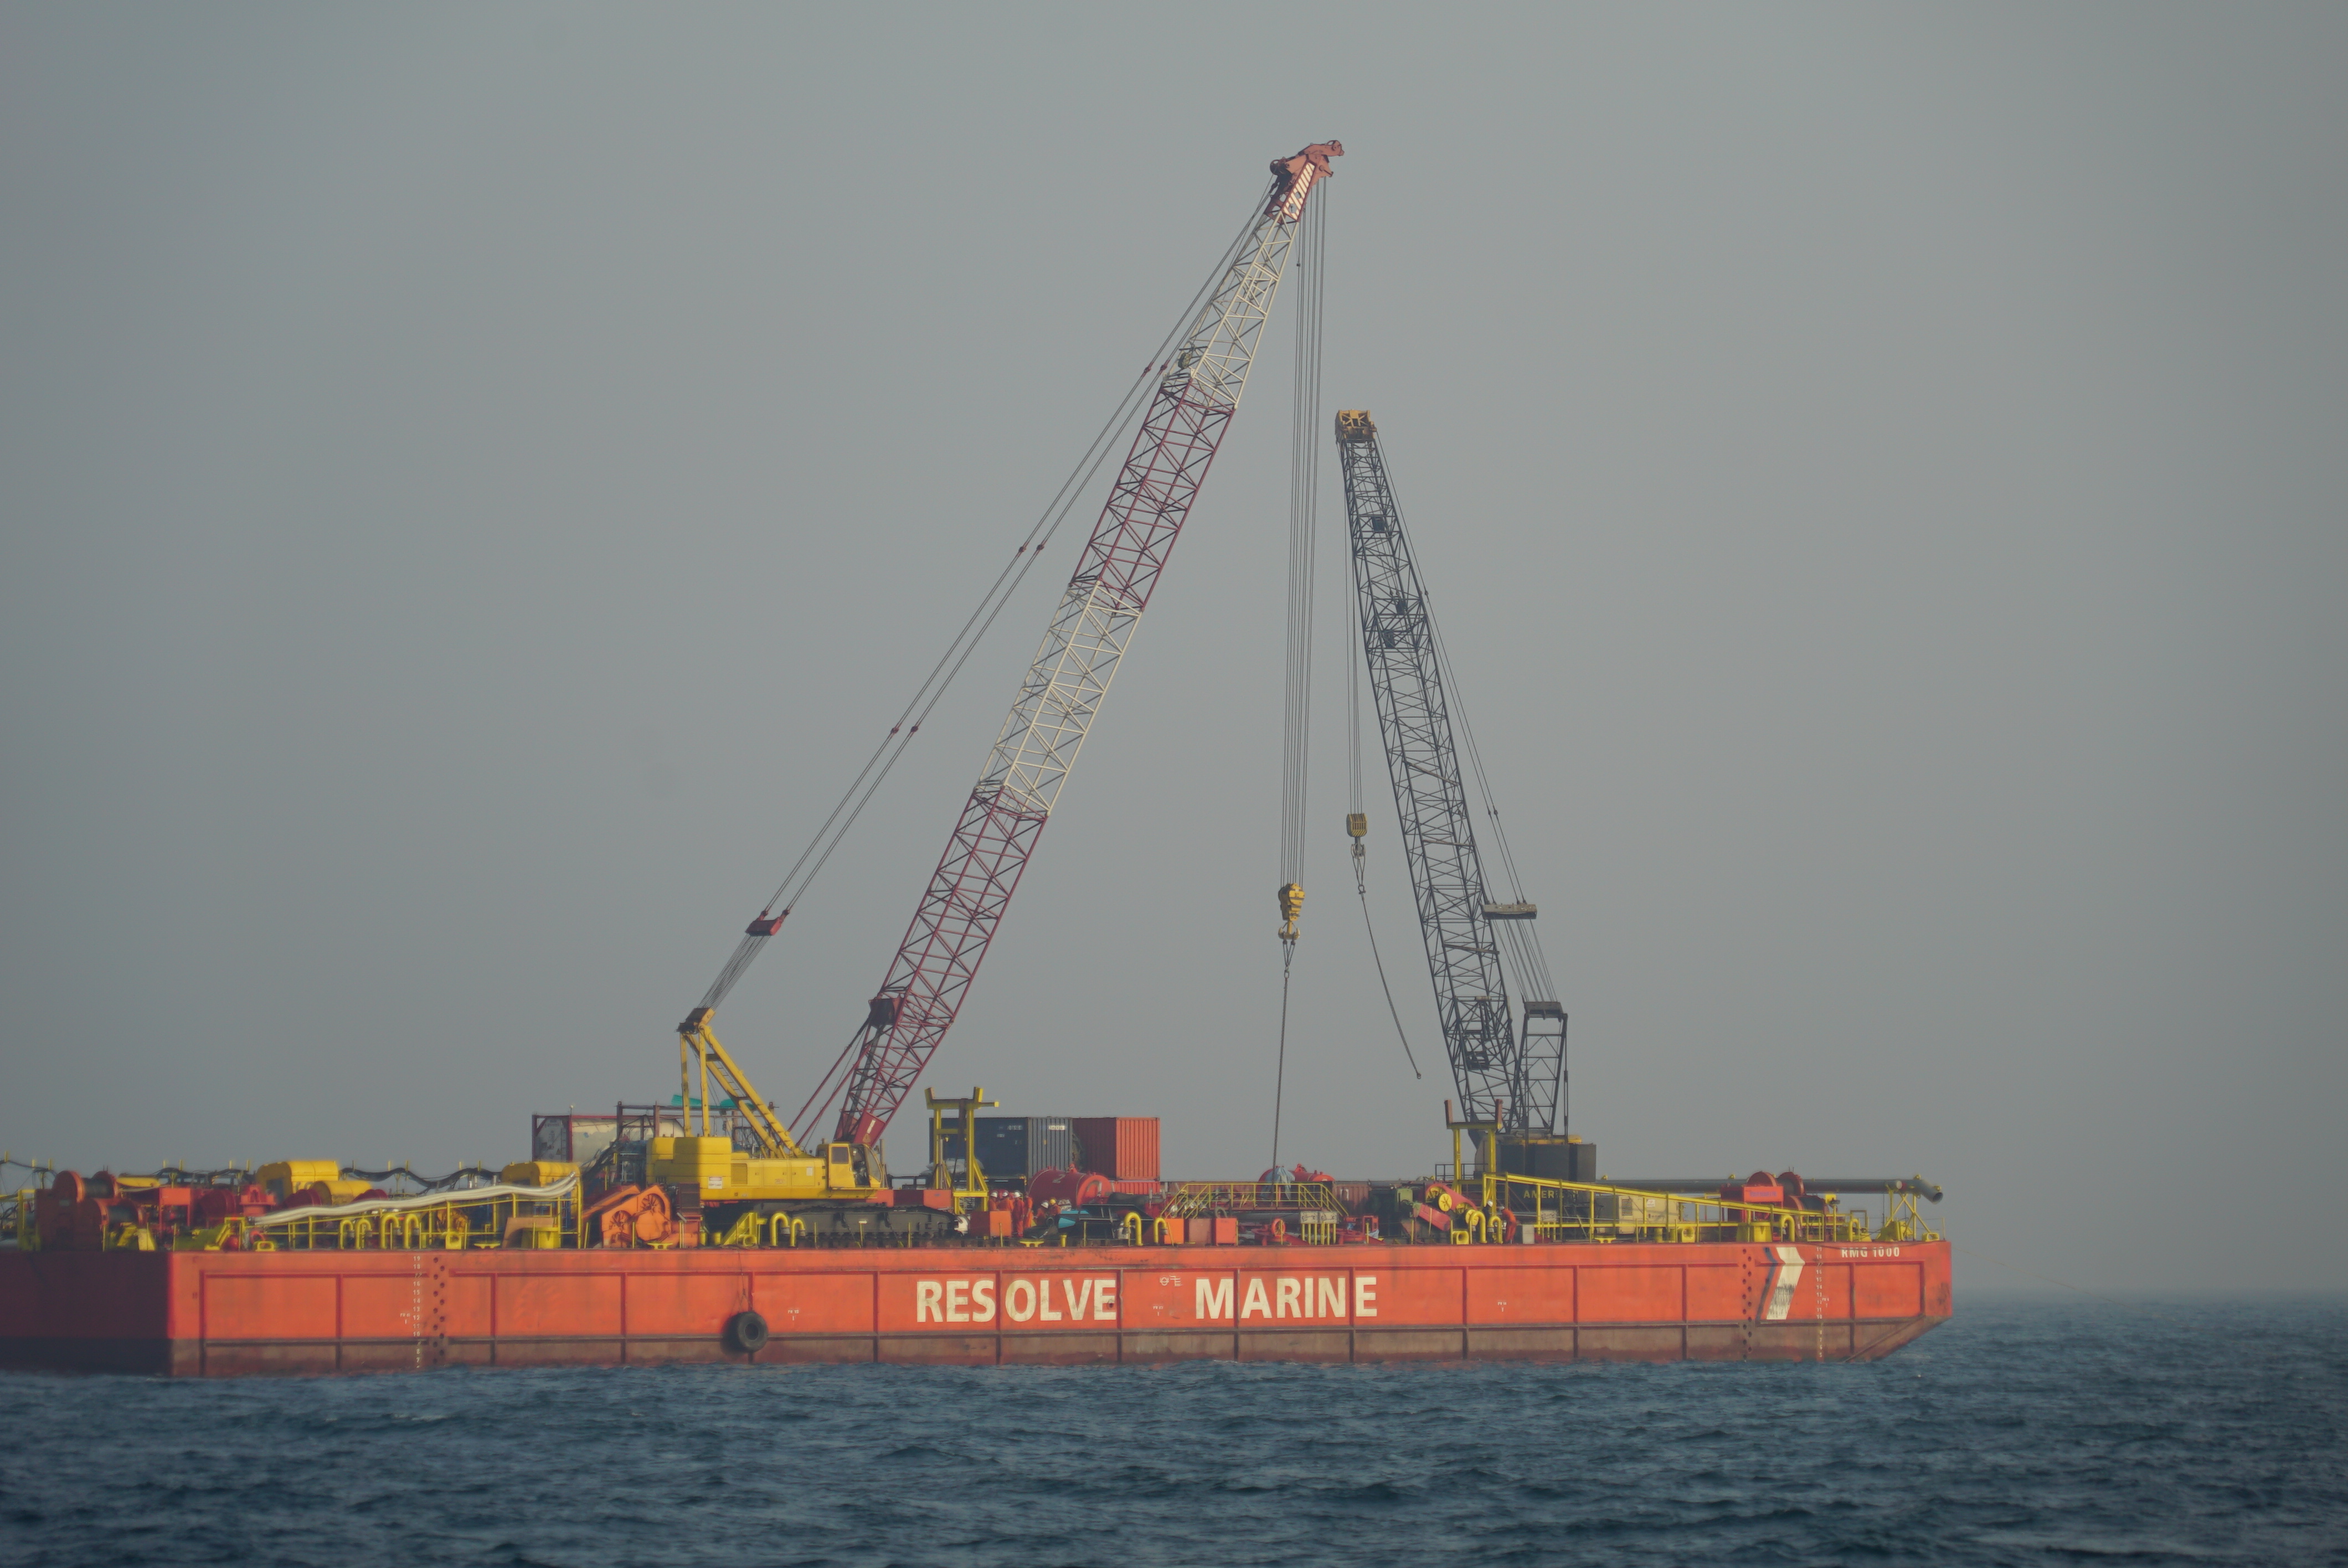 Resolve Marine barge with a large crane is pictured